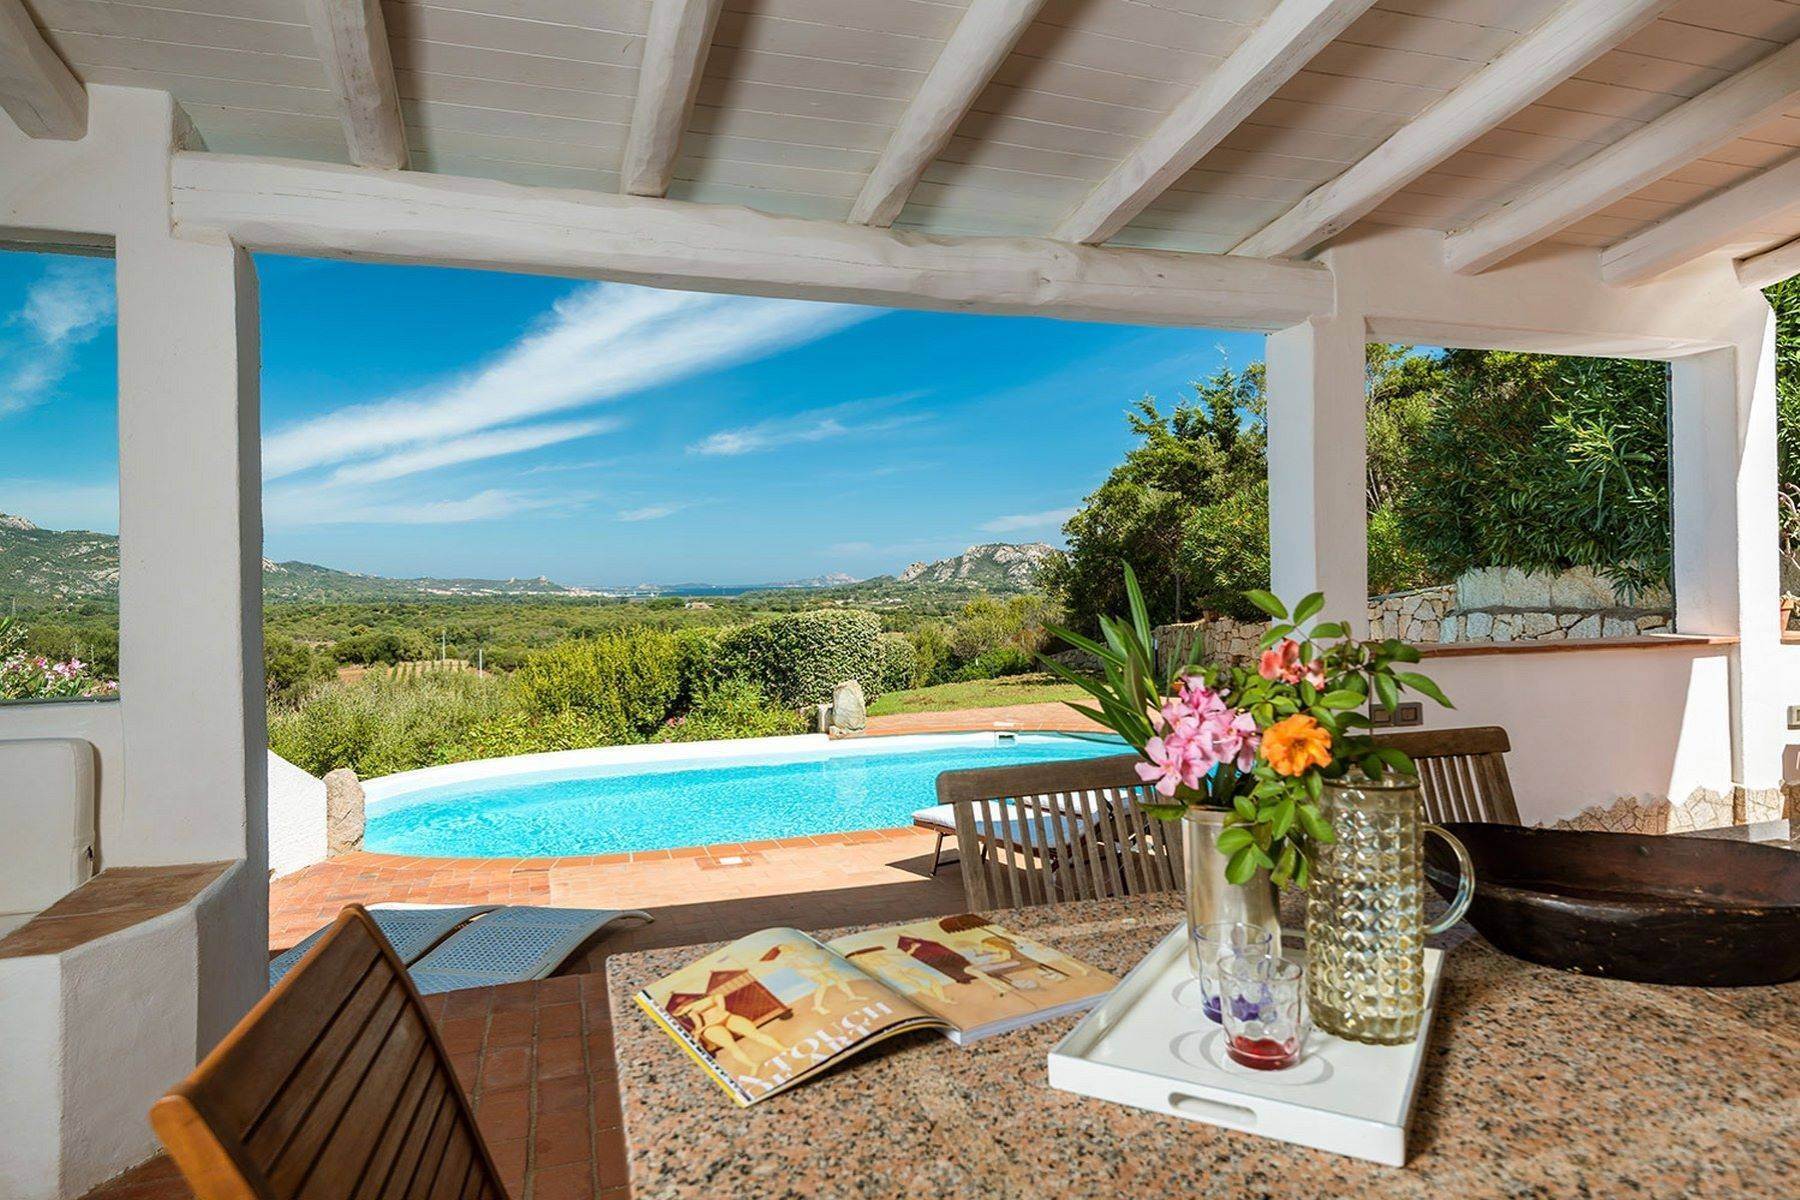 Single Family Homes for Sale at Country villa just a few minutes away from the Emerald Coast Porto Cervo, Sassari Italy